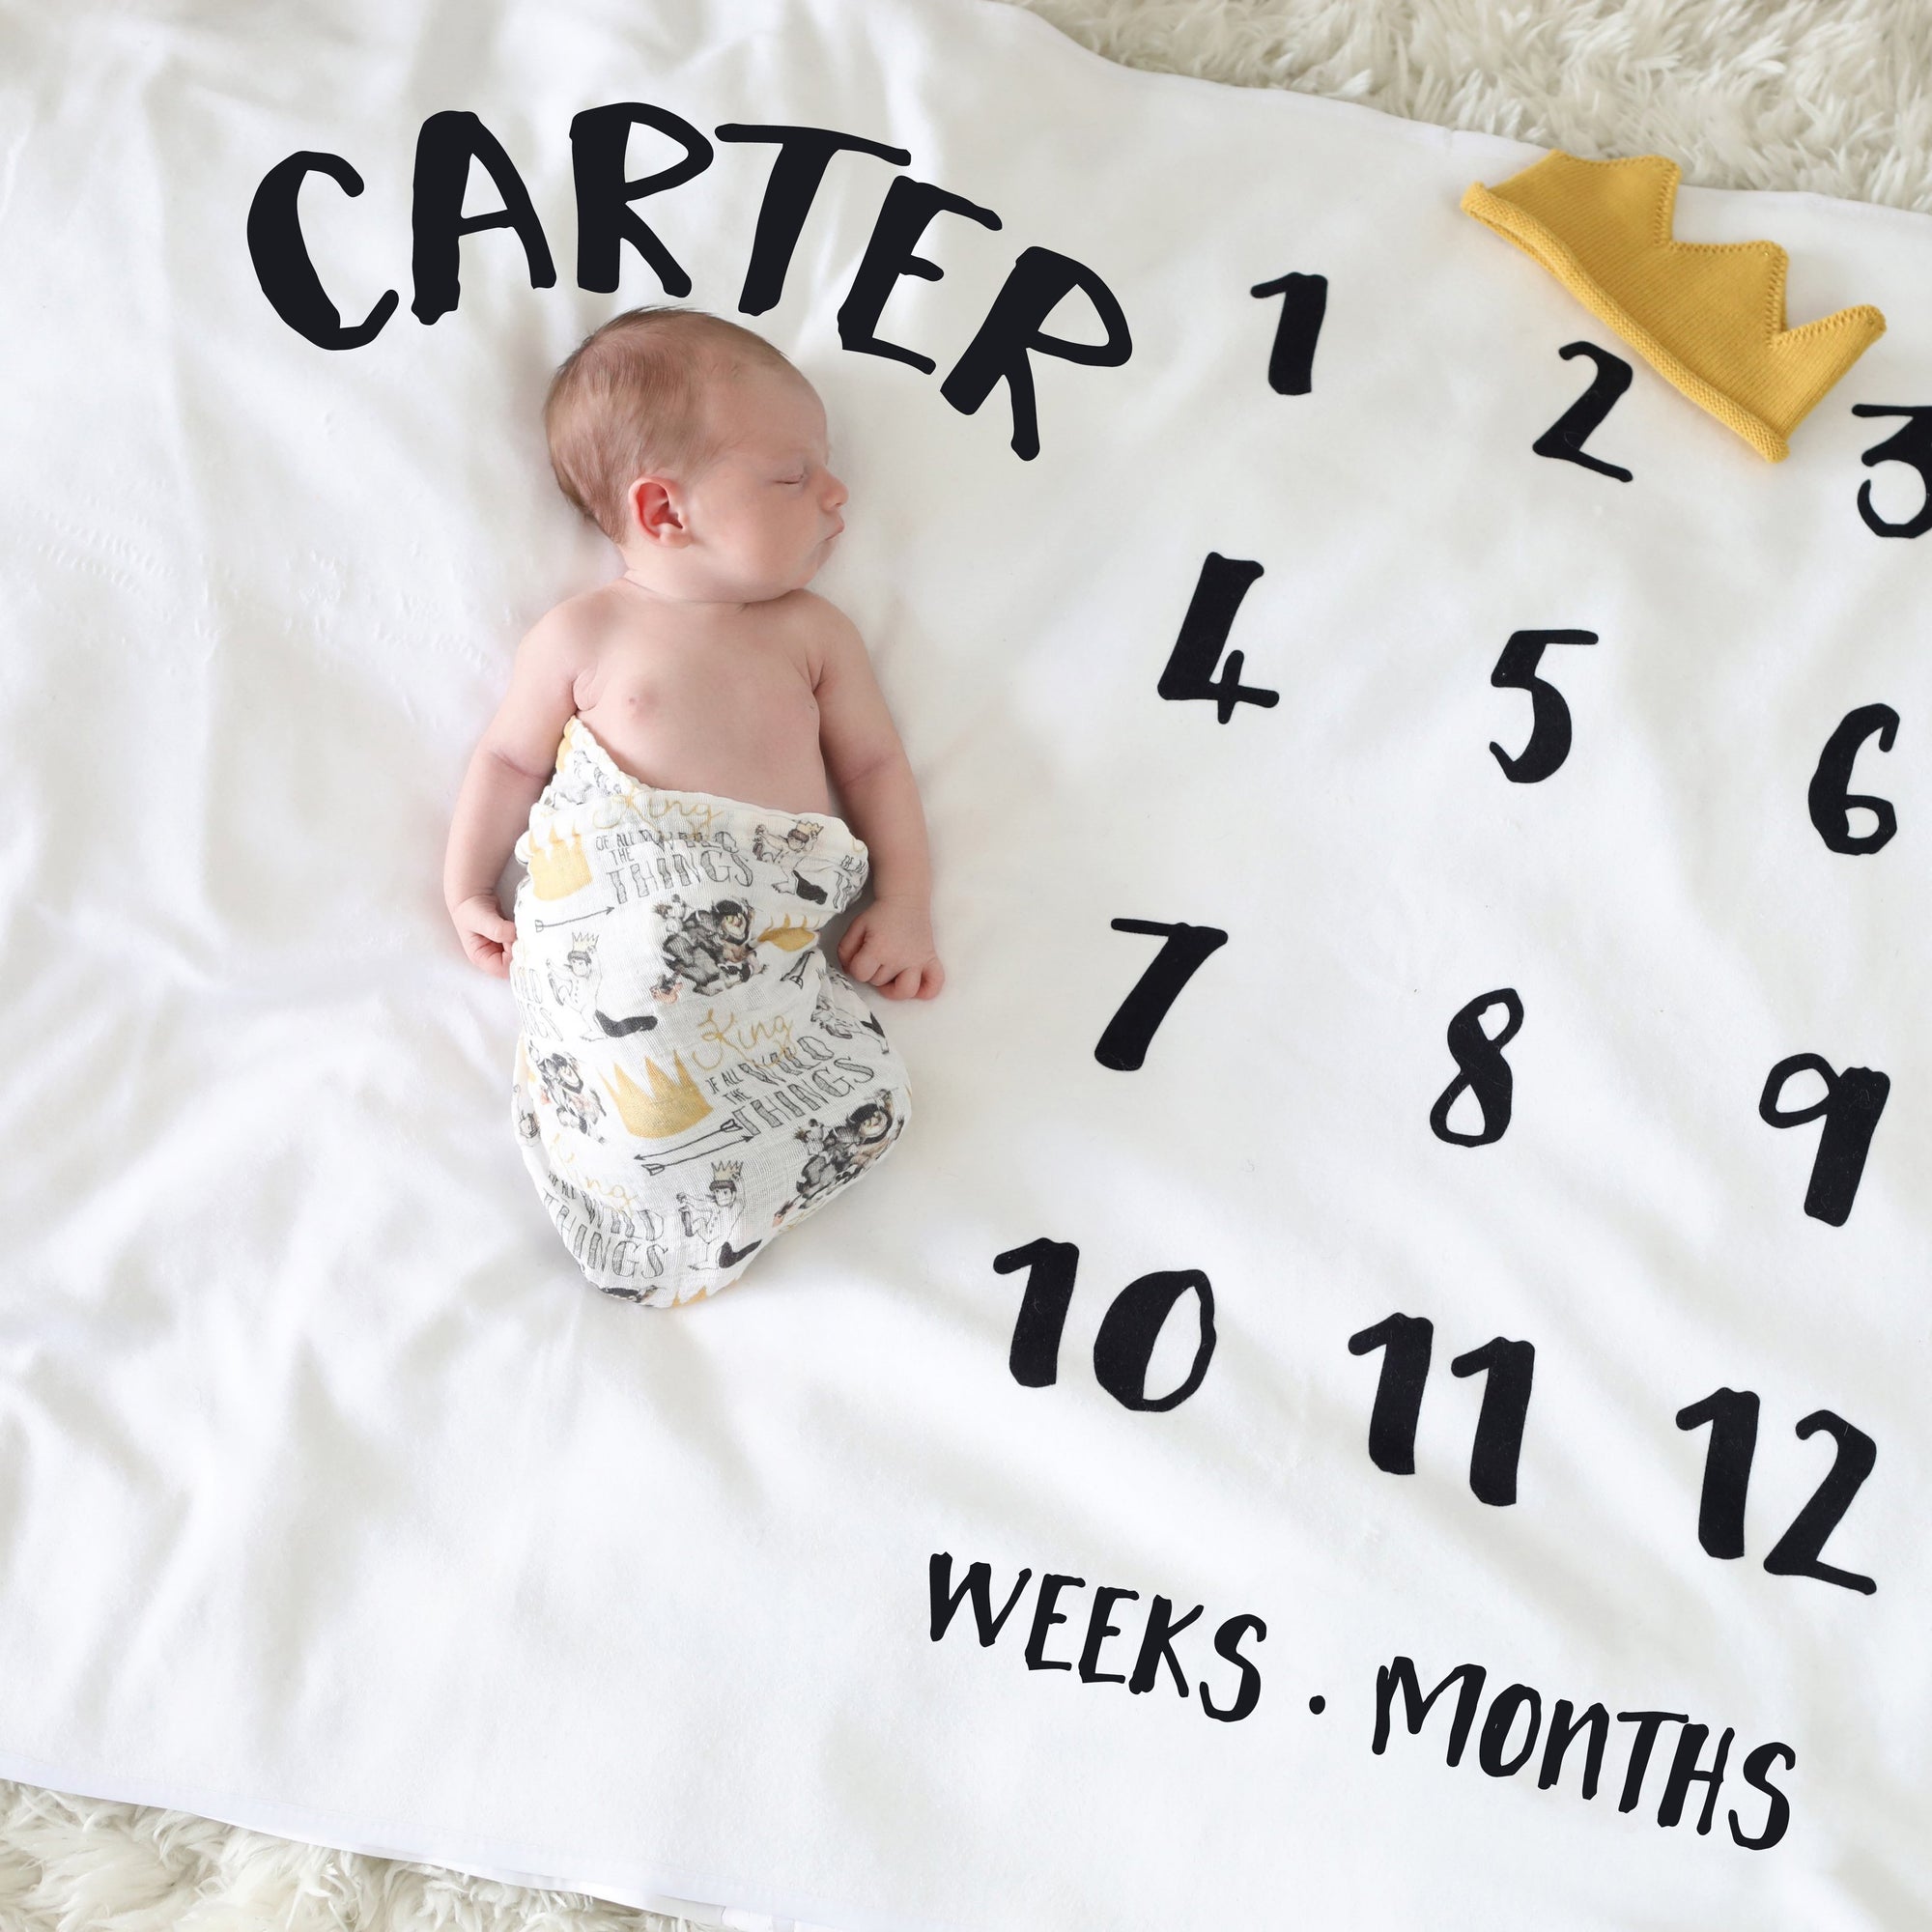 Classic Personalized Milestone Baby Blanket, Pick any text color, gender neutral, for a boy or girl